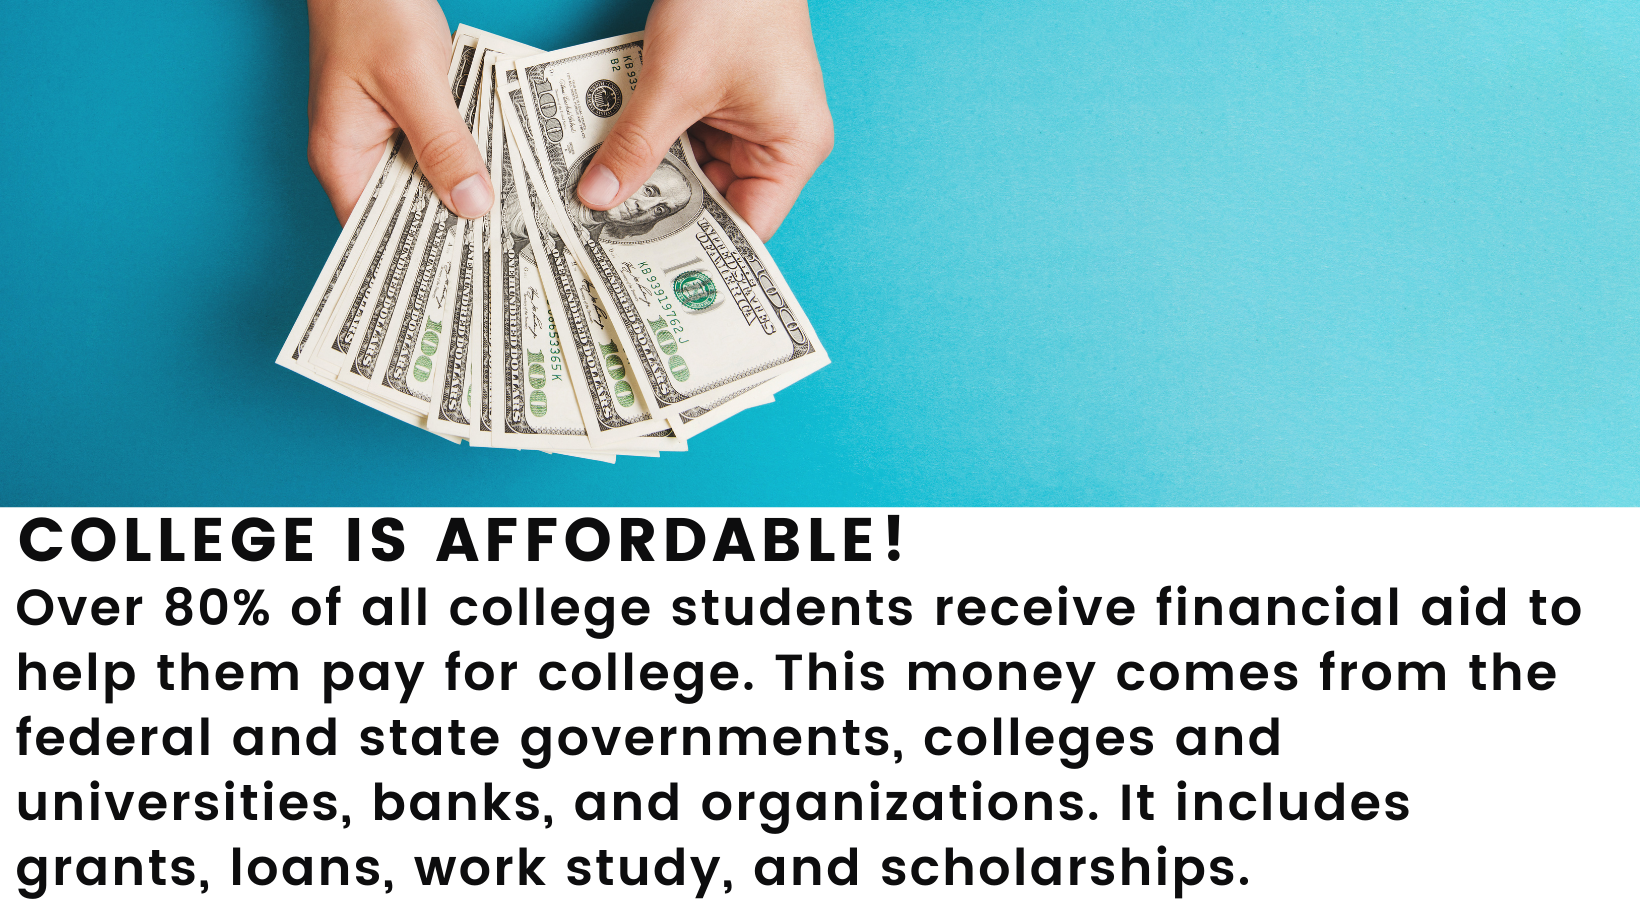 Image featuring a person's hands holding cash. Header: College is affordable! Body: Over 80% of all college students receive financial aid to help them pay for college. This money comes from the federal and state governments, colleges and universities, banks, and organizations. It includes grants, loans, work study, and scholarships. 